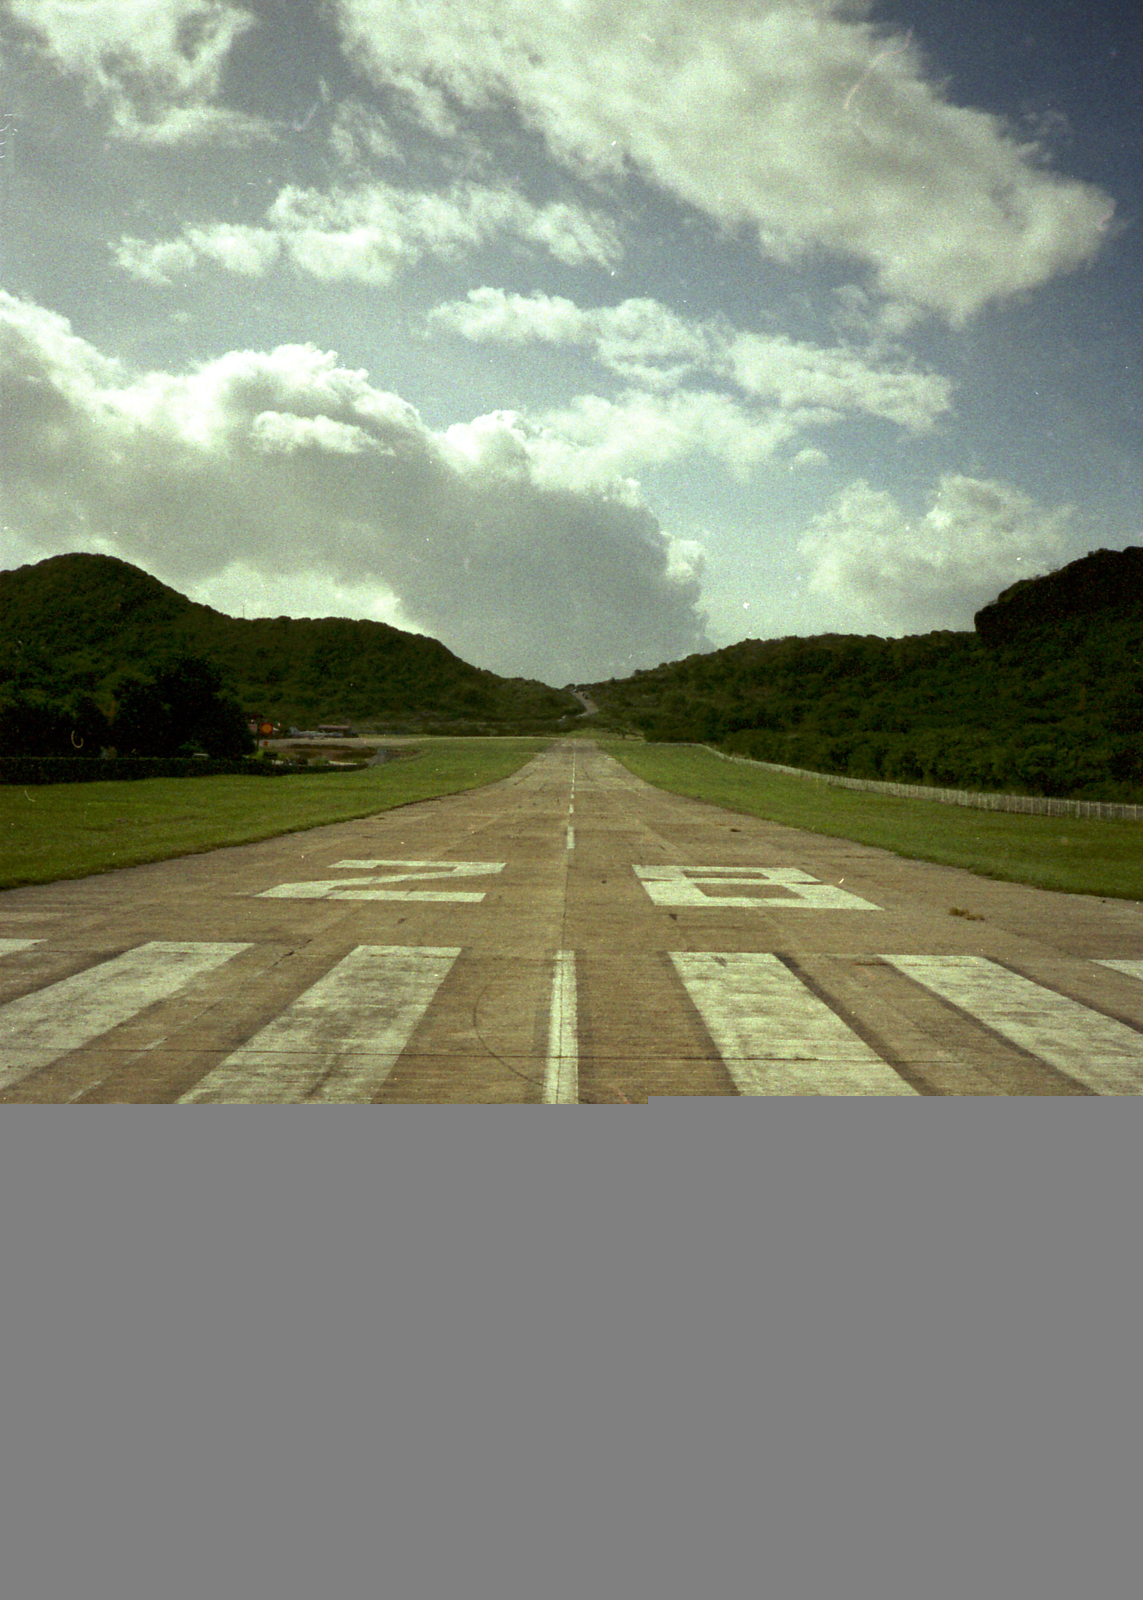 Gustaf III Airport, St. Jean, Saint Barthélemy Guadeloupe (SBH) - St Barthelemy, Approach end of Rwy 28.  Traffic never lands this direction due to hill and trade winds